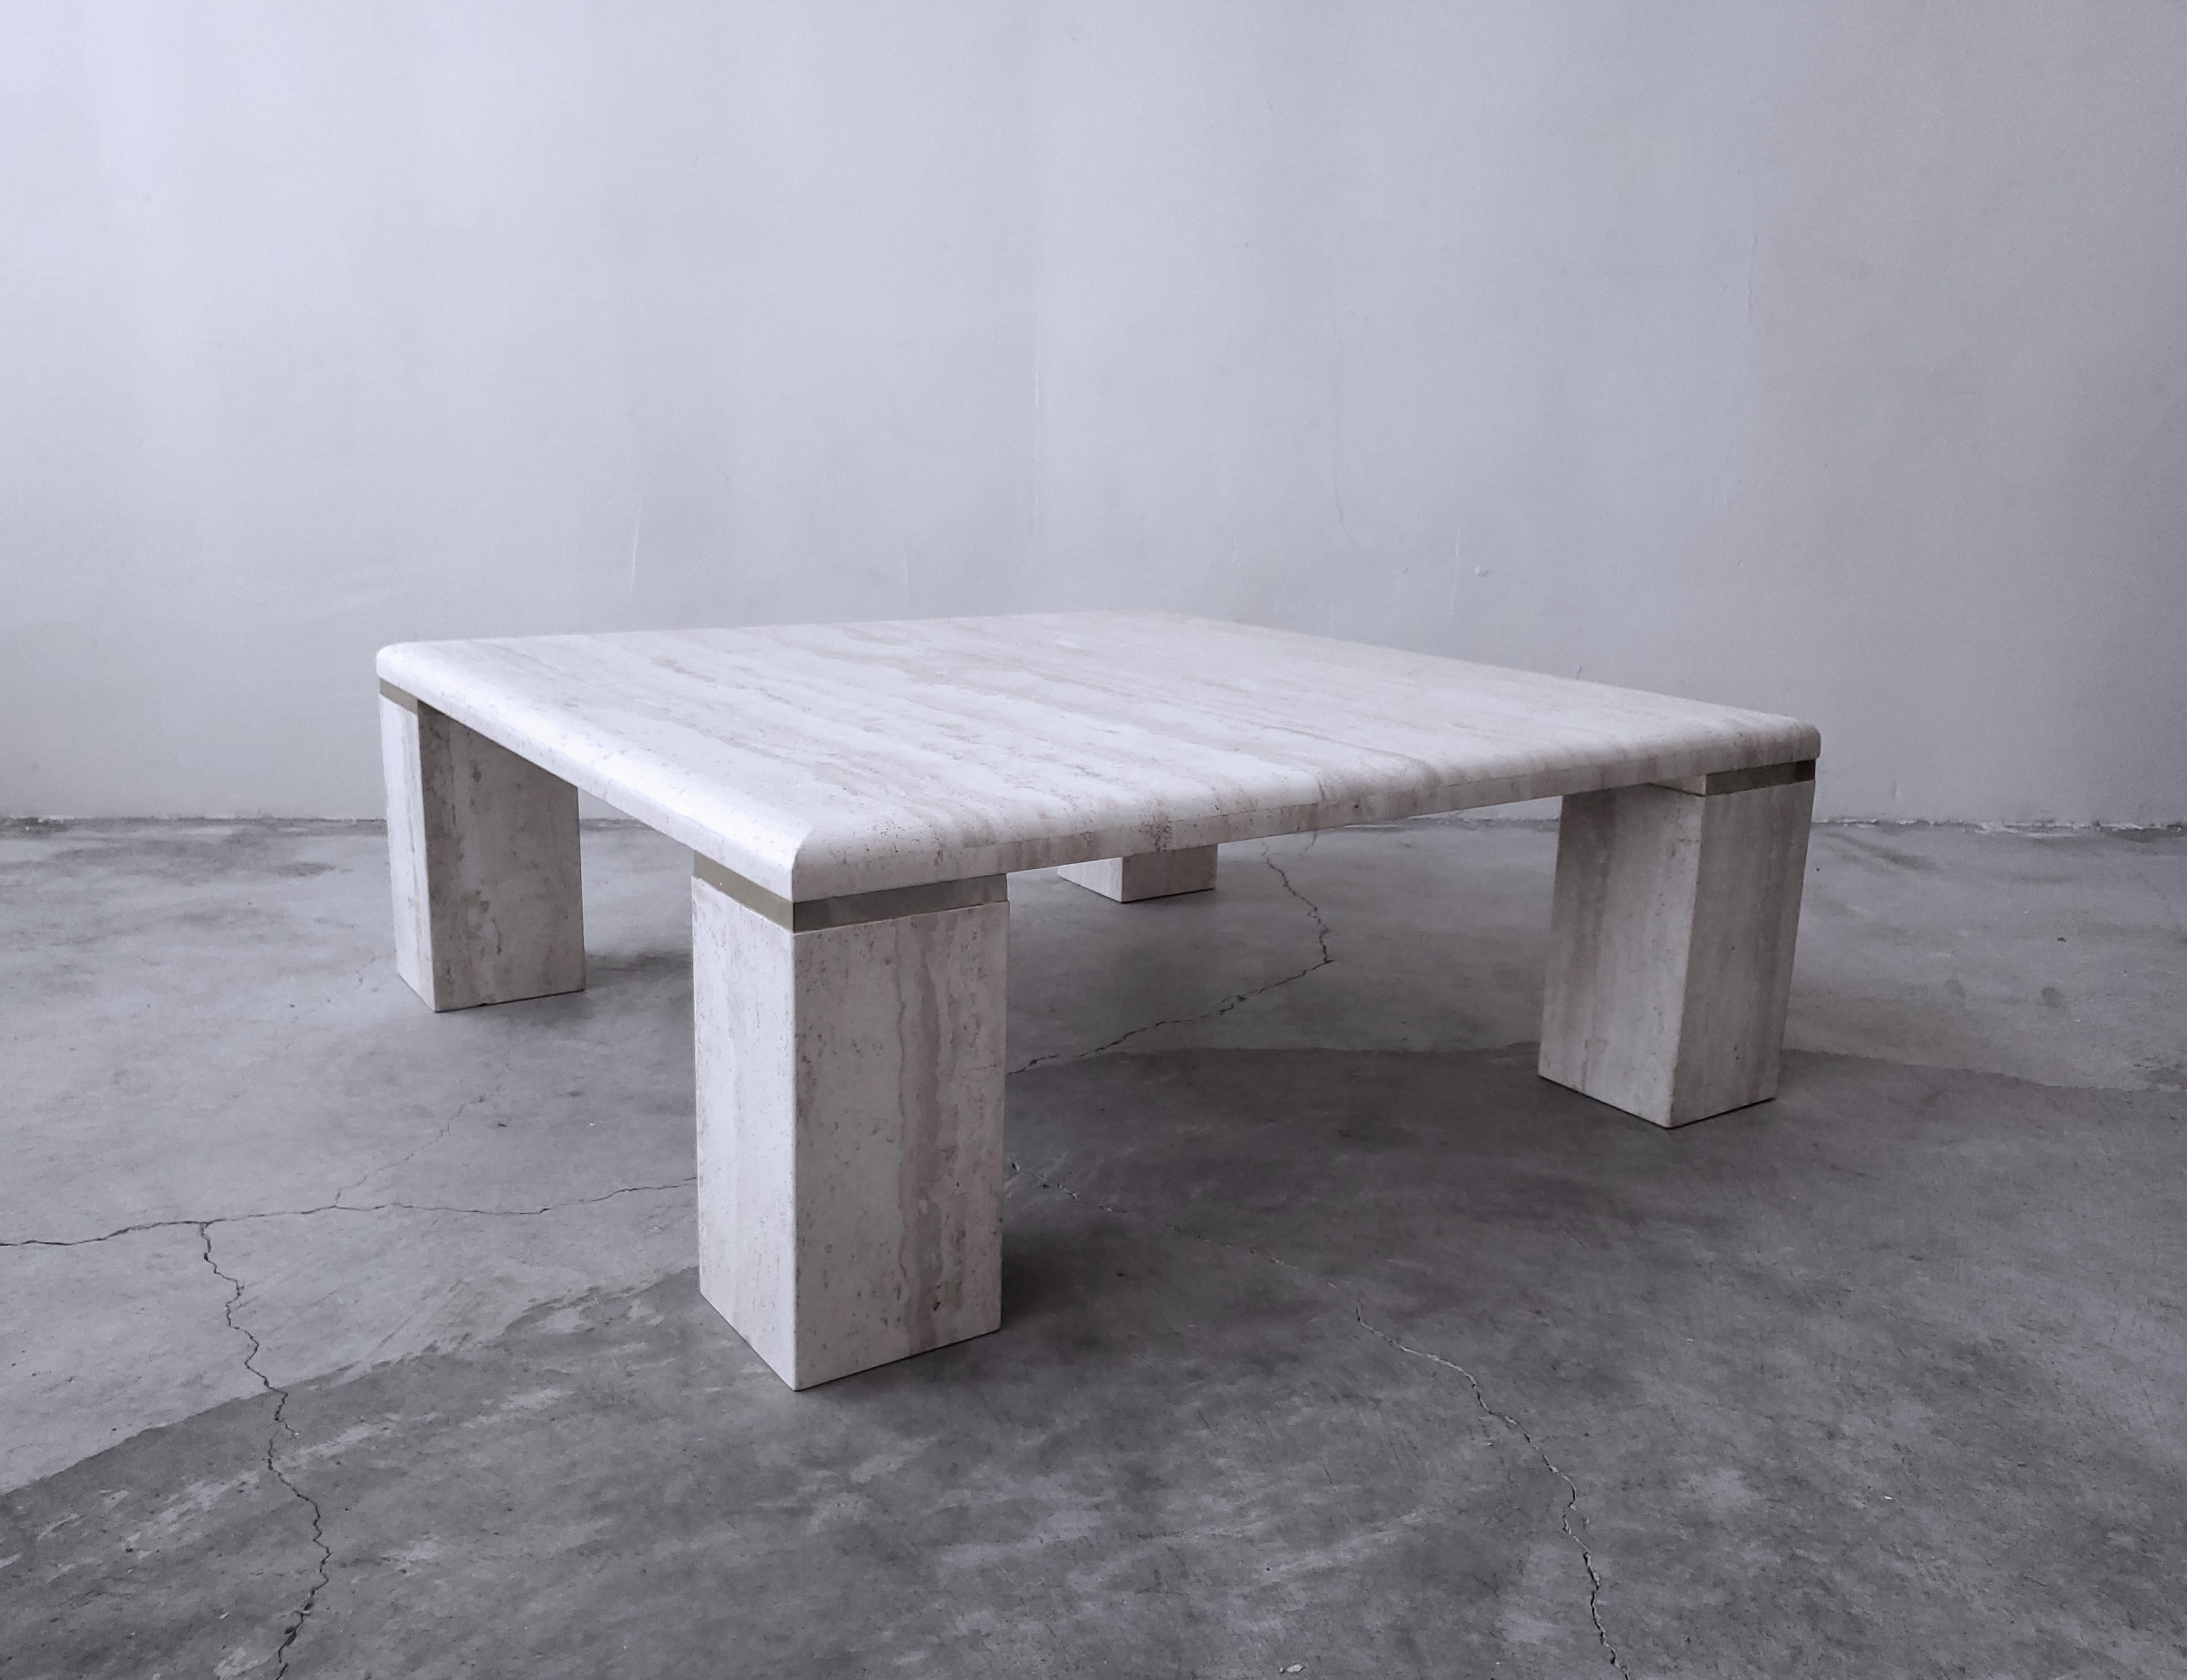 Very elegant, vintage square travertine coffee table. Simple, beautiful piece. Tabletop is a square with 4 large square legs that are manufactured with a nice brass separation detail, classing it up a bit more. 

Table is in excellent condition.